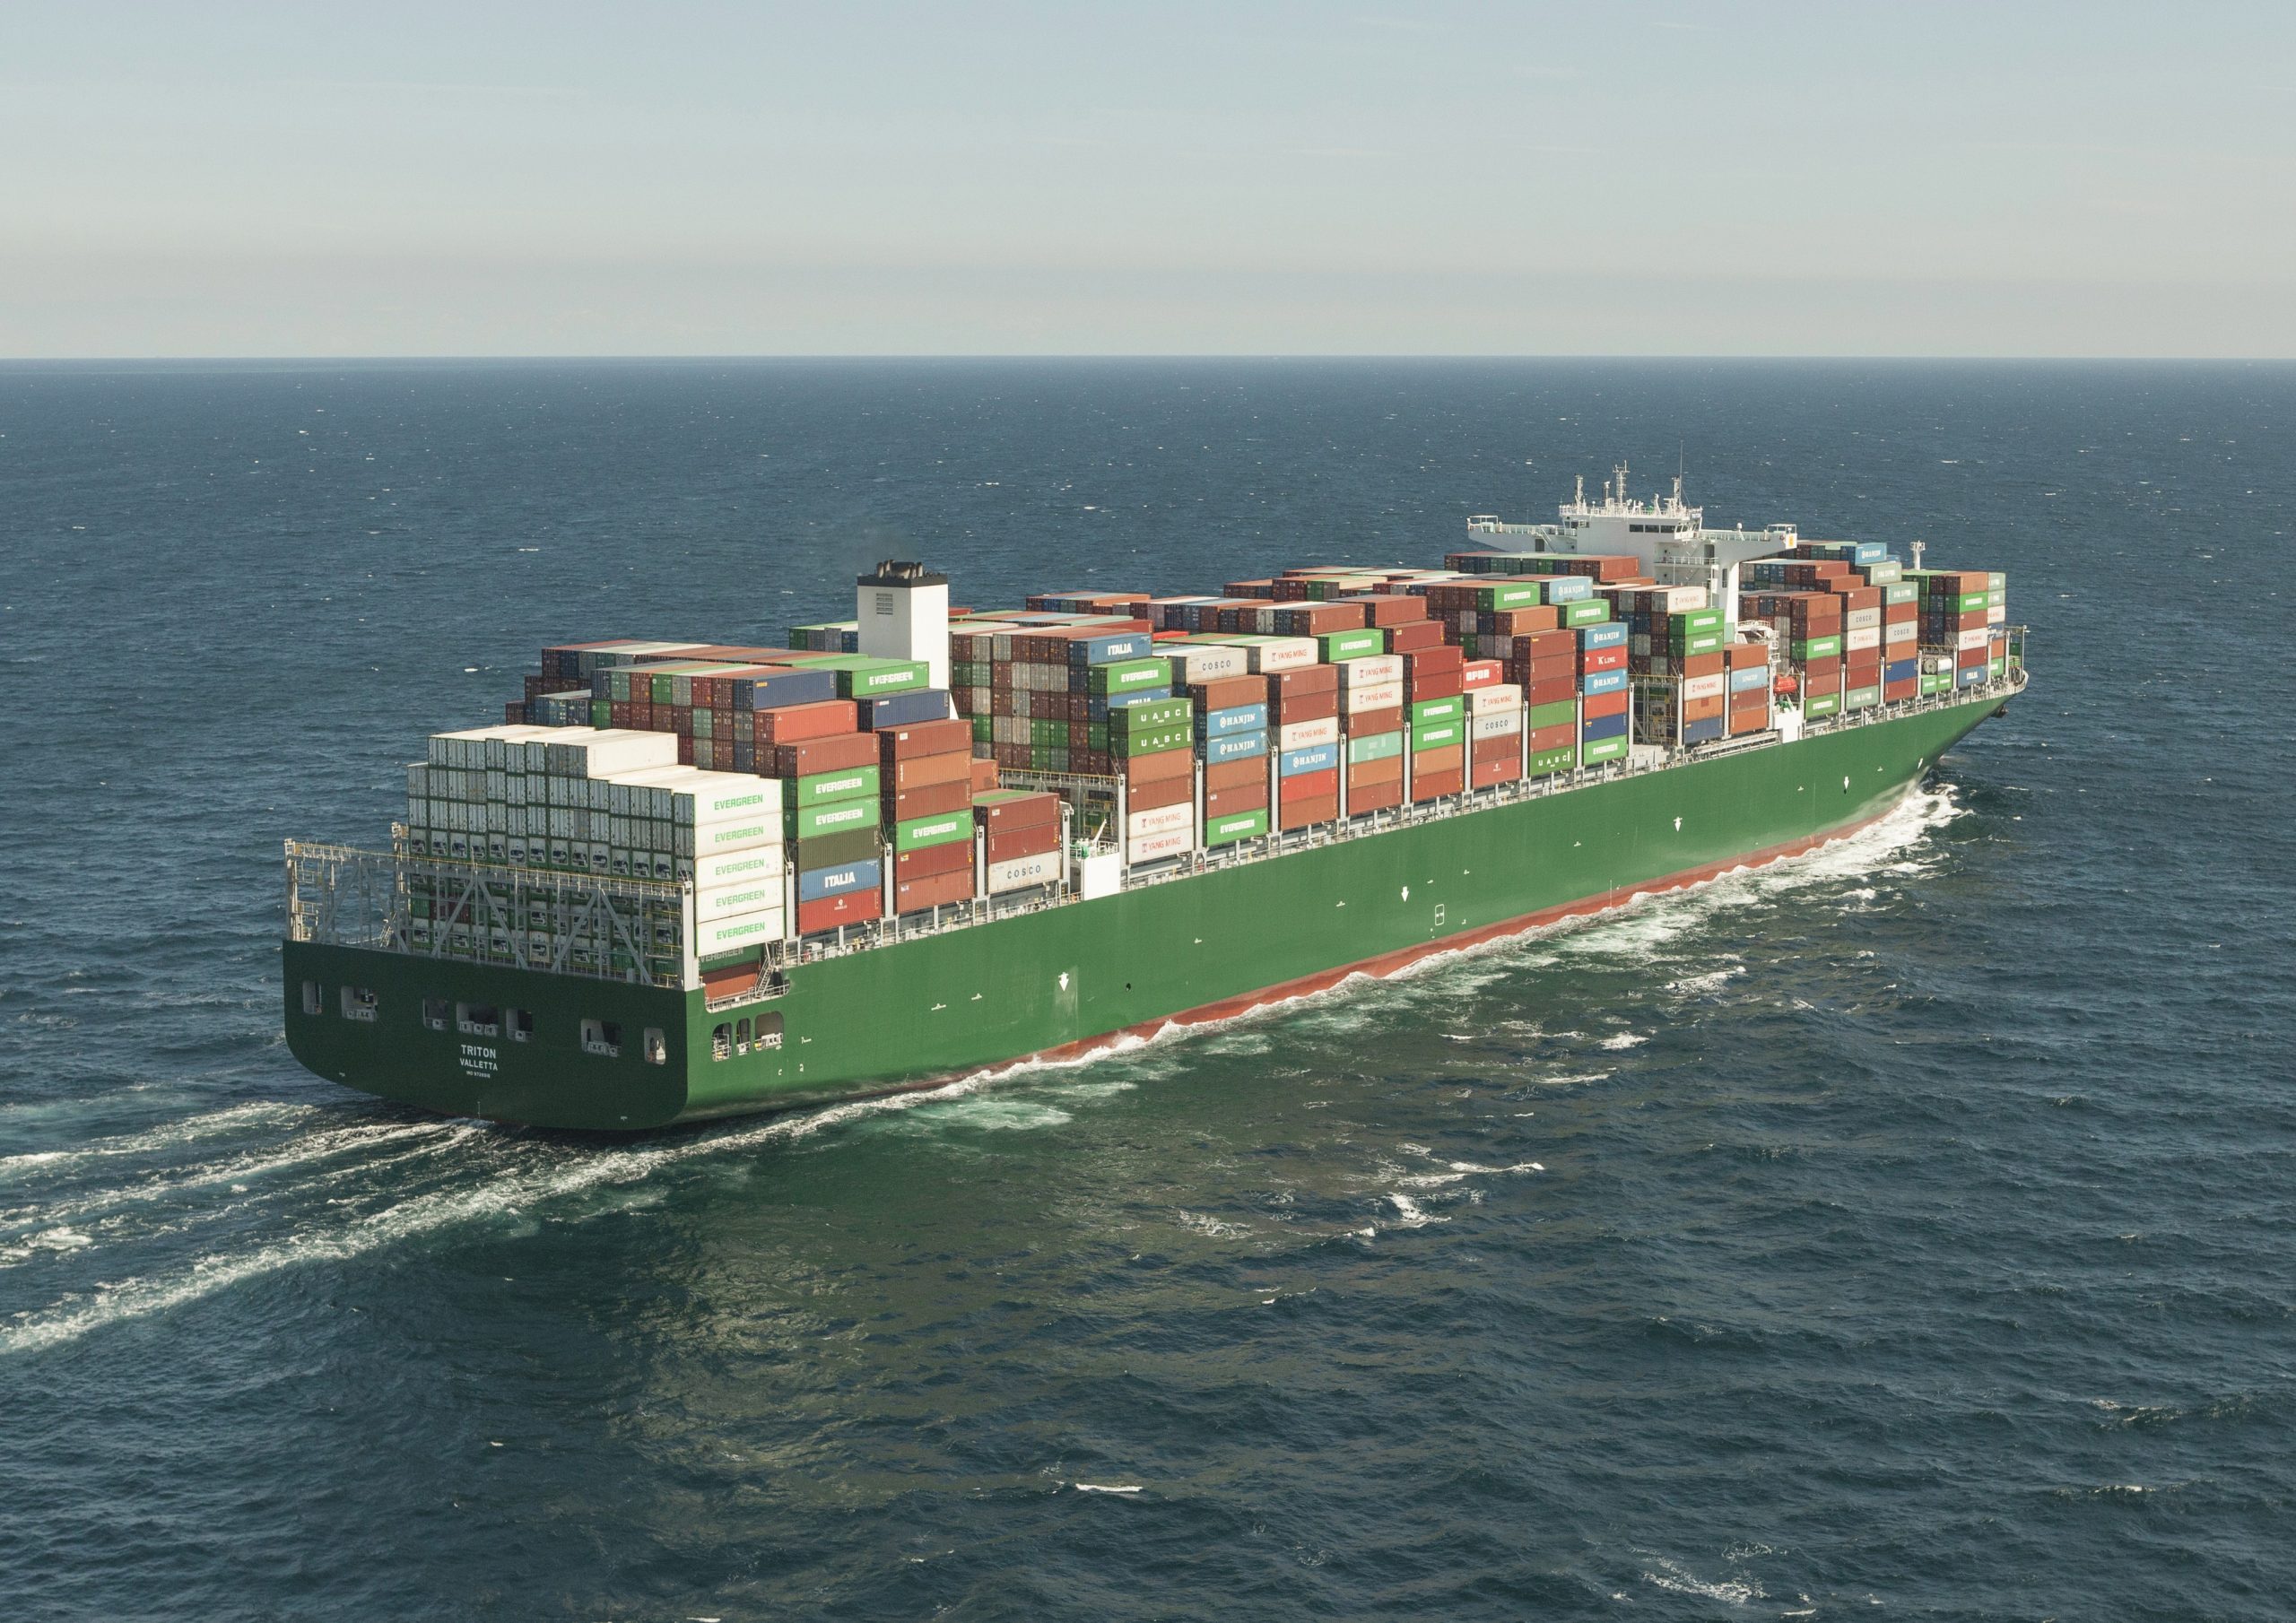 Costamare’s entry into bulk dry cargo with the purchase of 16 ships